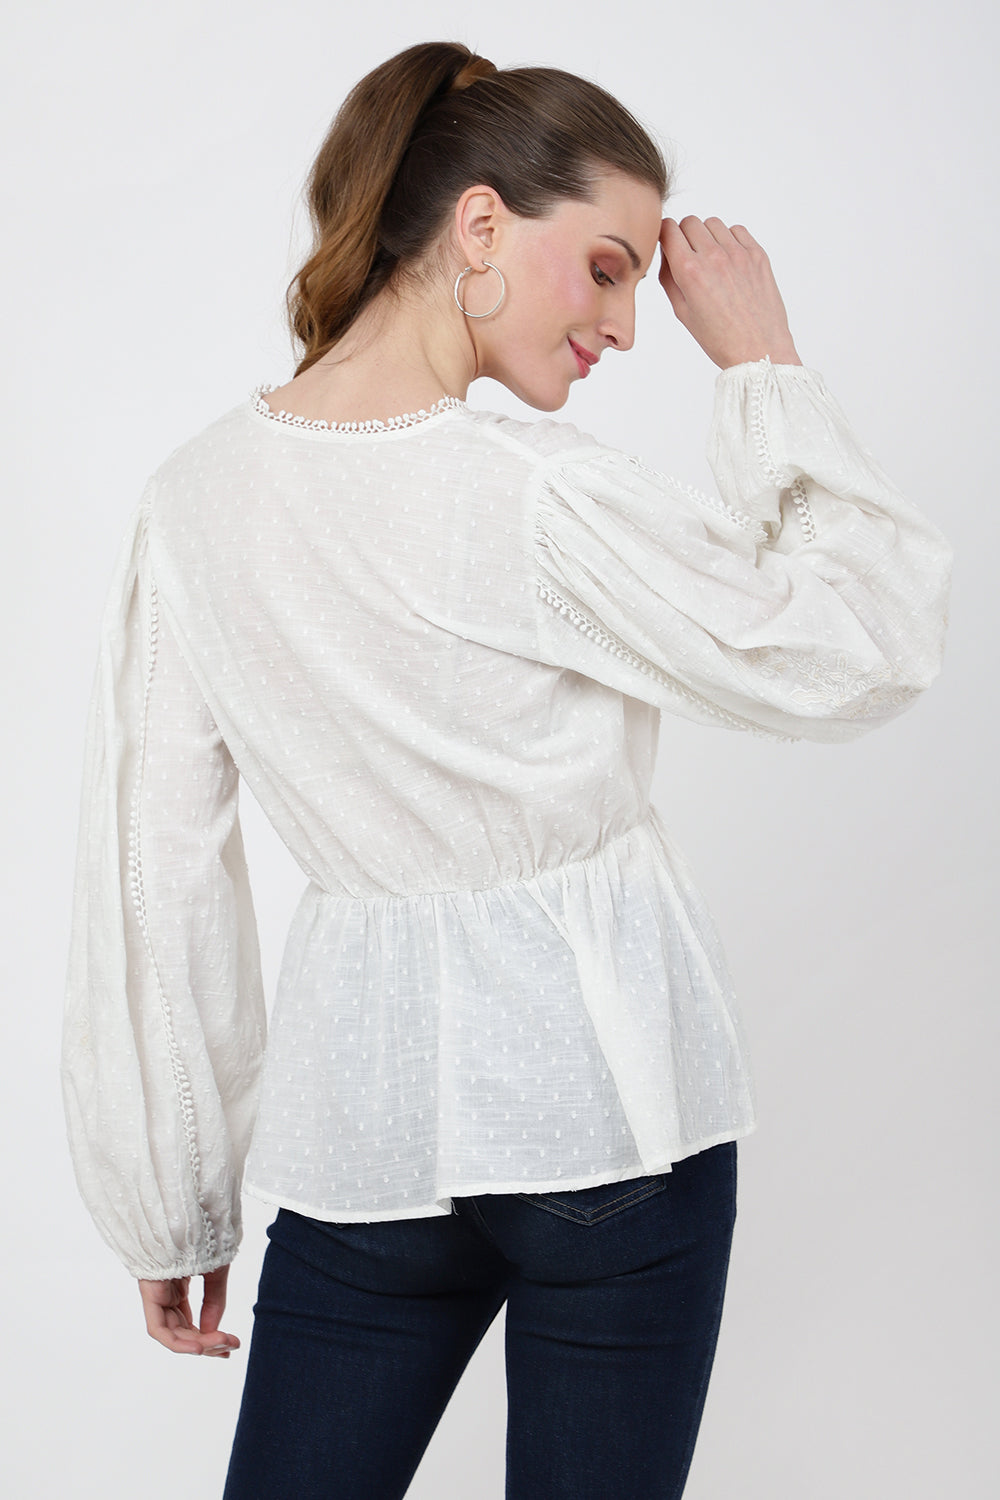 Tonal Embroidered Peplum Top with V-Neckline - S to 2XL